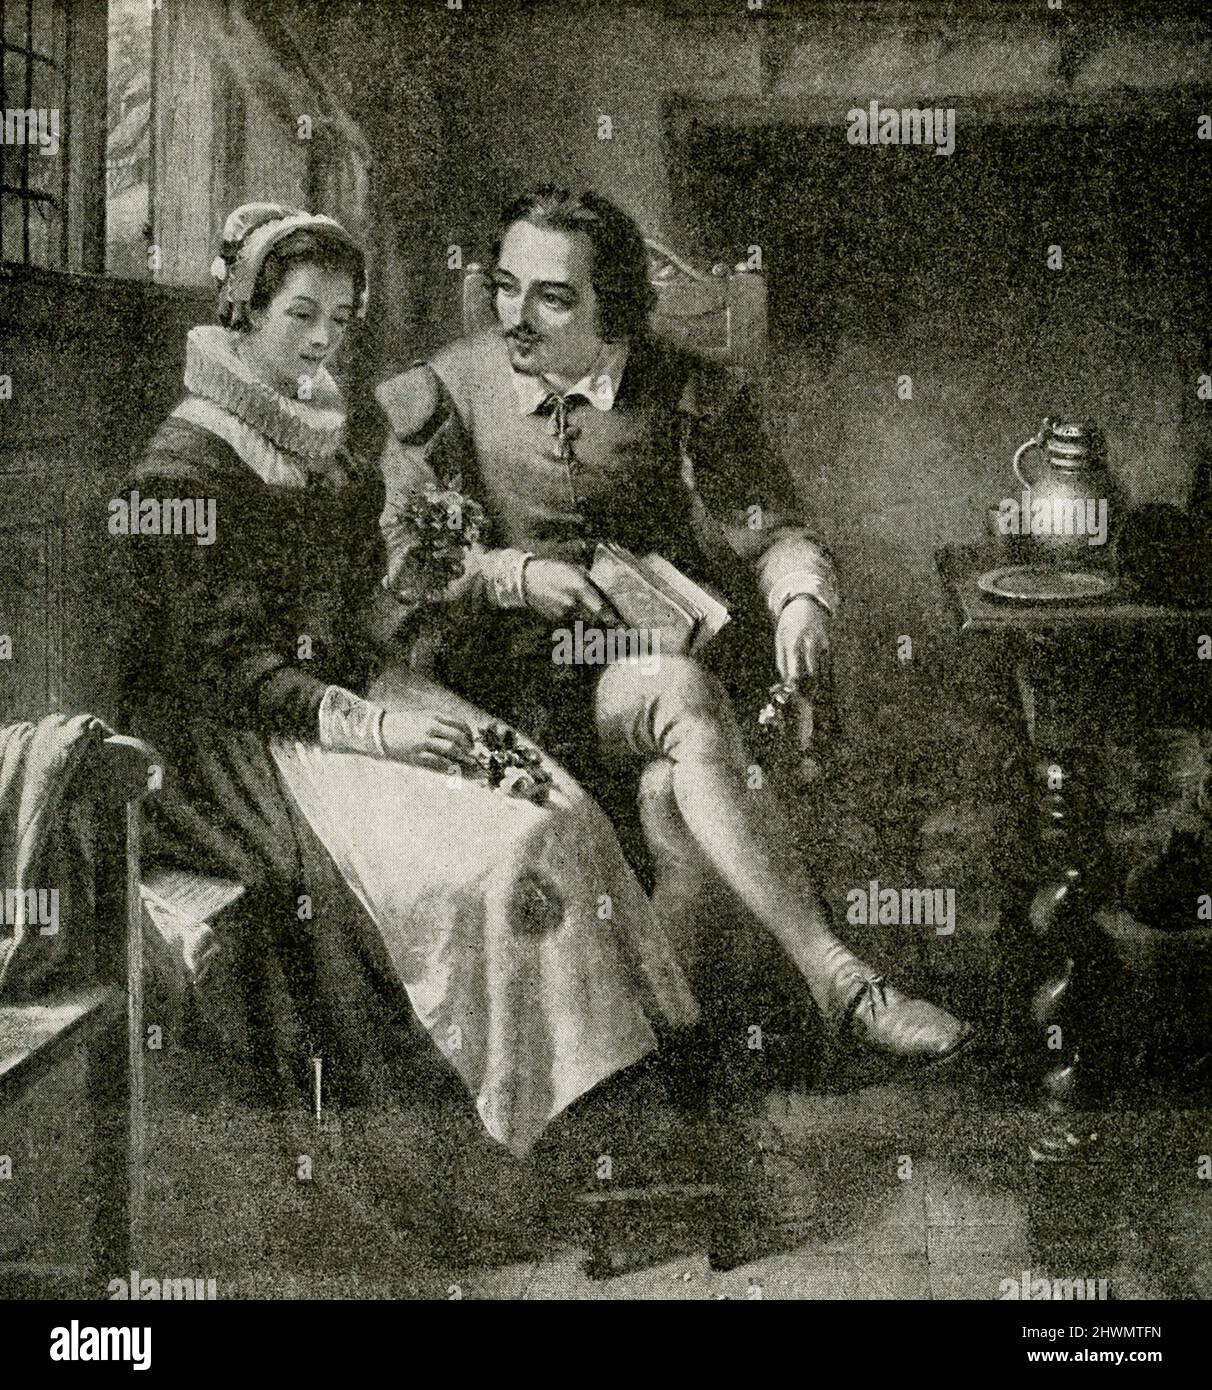 The 1912 caption for this image reads: 'Shakespeare at age 19 in Anne Hathaway's Cottage at Stratford - Cottage of Anne Hathaway.' The 1912 caption for this illustration reads: William Shakespeare (died 1616) was an English playwright, poet and actor, widely regarded as the greatest writer in the English language and the world's greatest dramatist. He is often called England's national poet and the 'Bard of Avon'. Anne Hathaway (died 1623) was Shakespeare’s wife. They were married in 1582, when Hathaway was 26 years old and Shakespeare was 18. Stock Photo